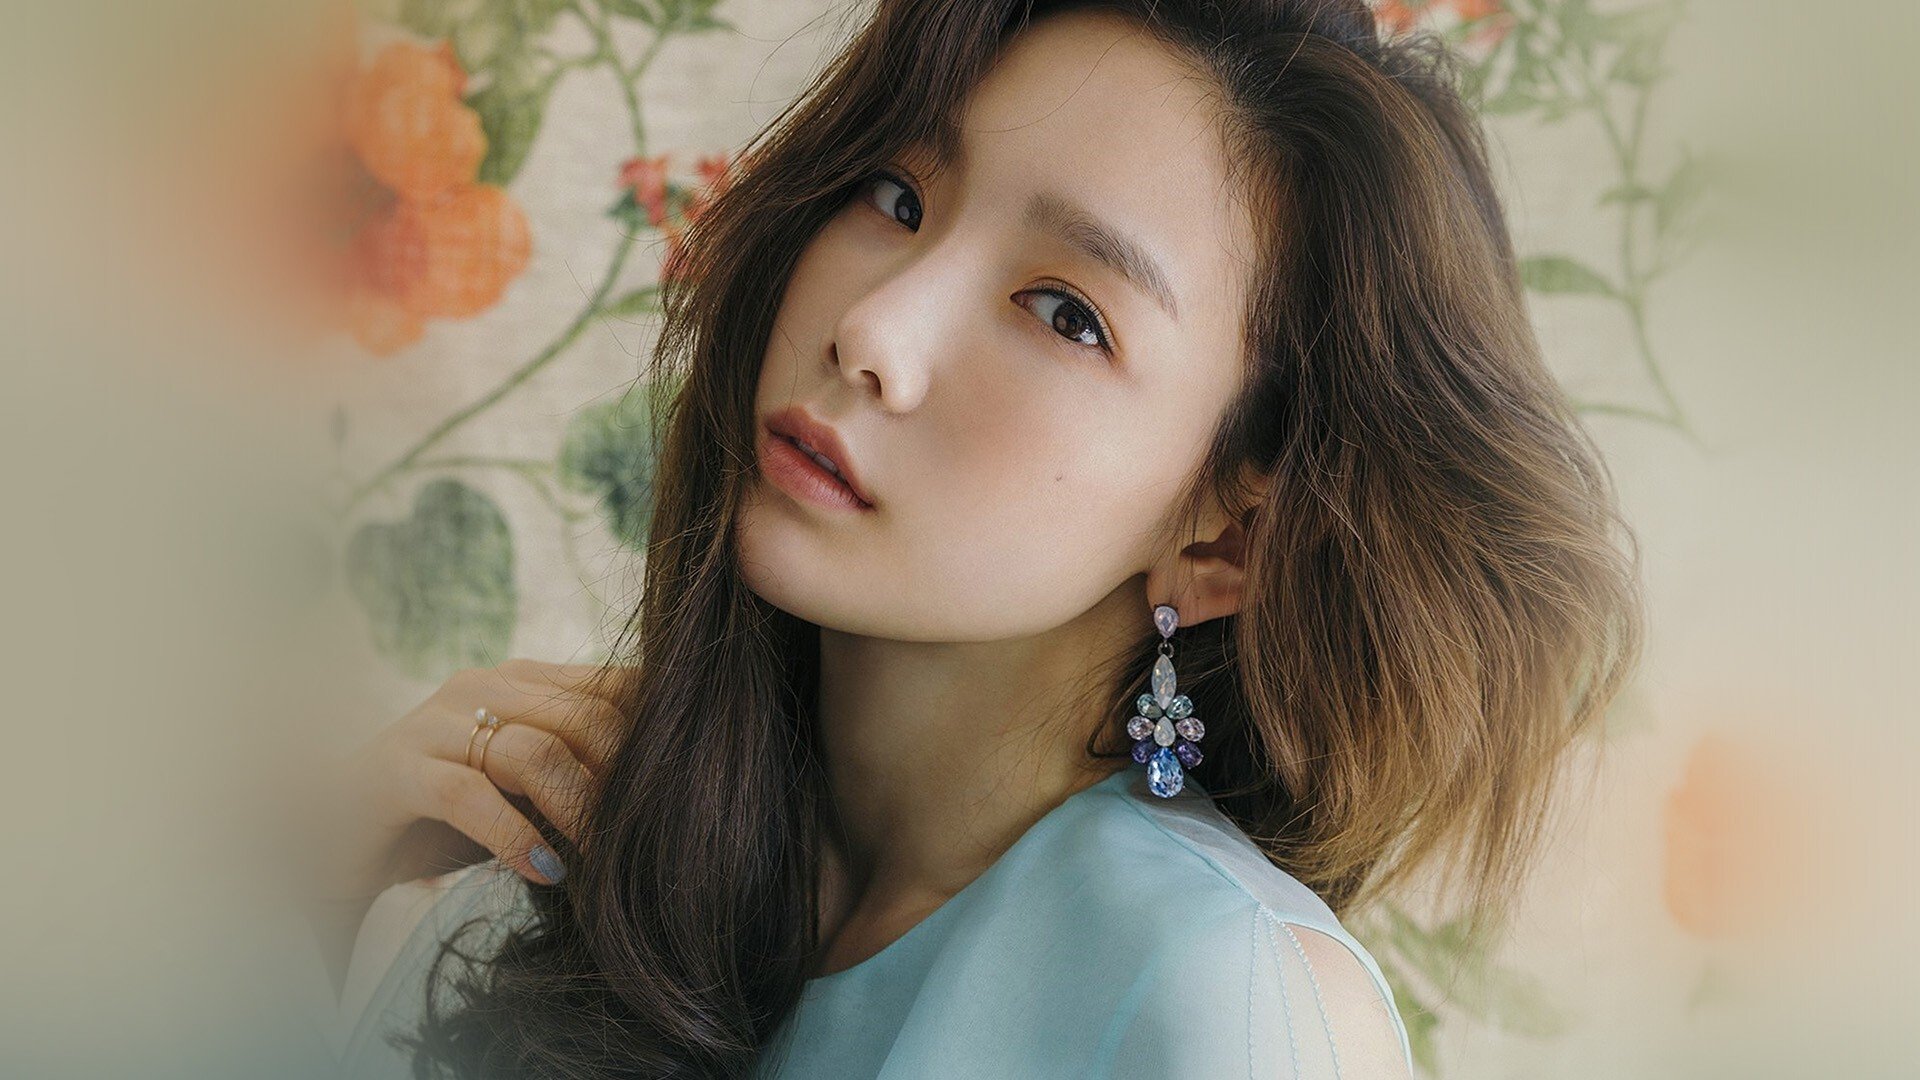 Taeyeon is often considered one of the most popular K-pop idols.